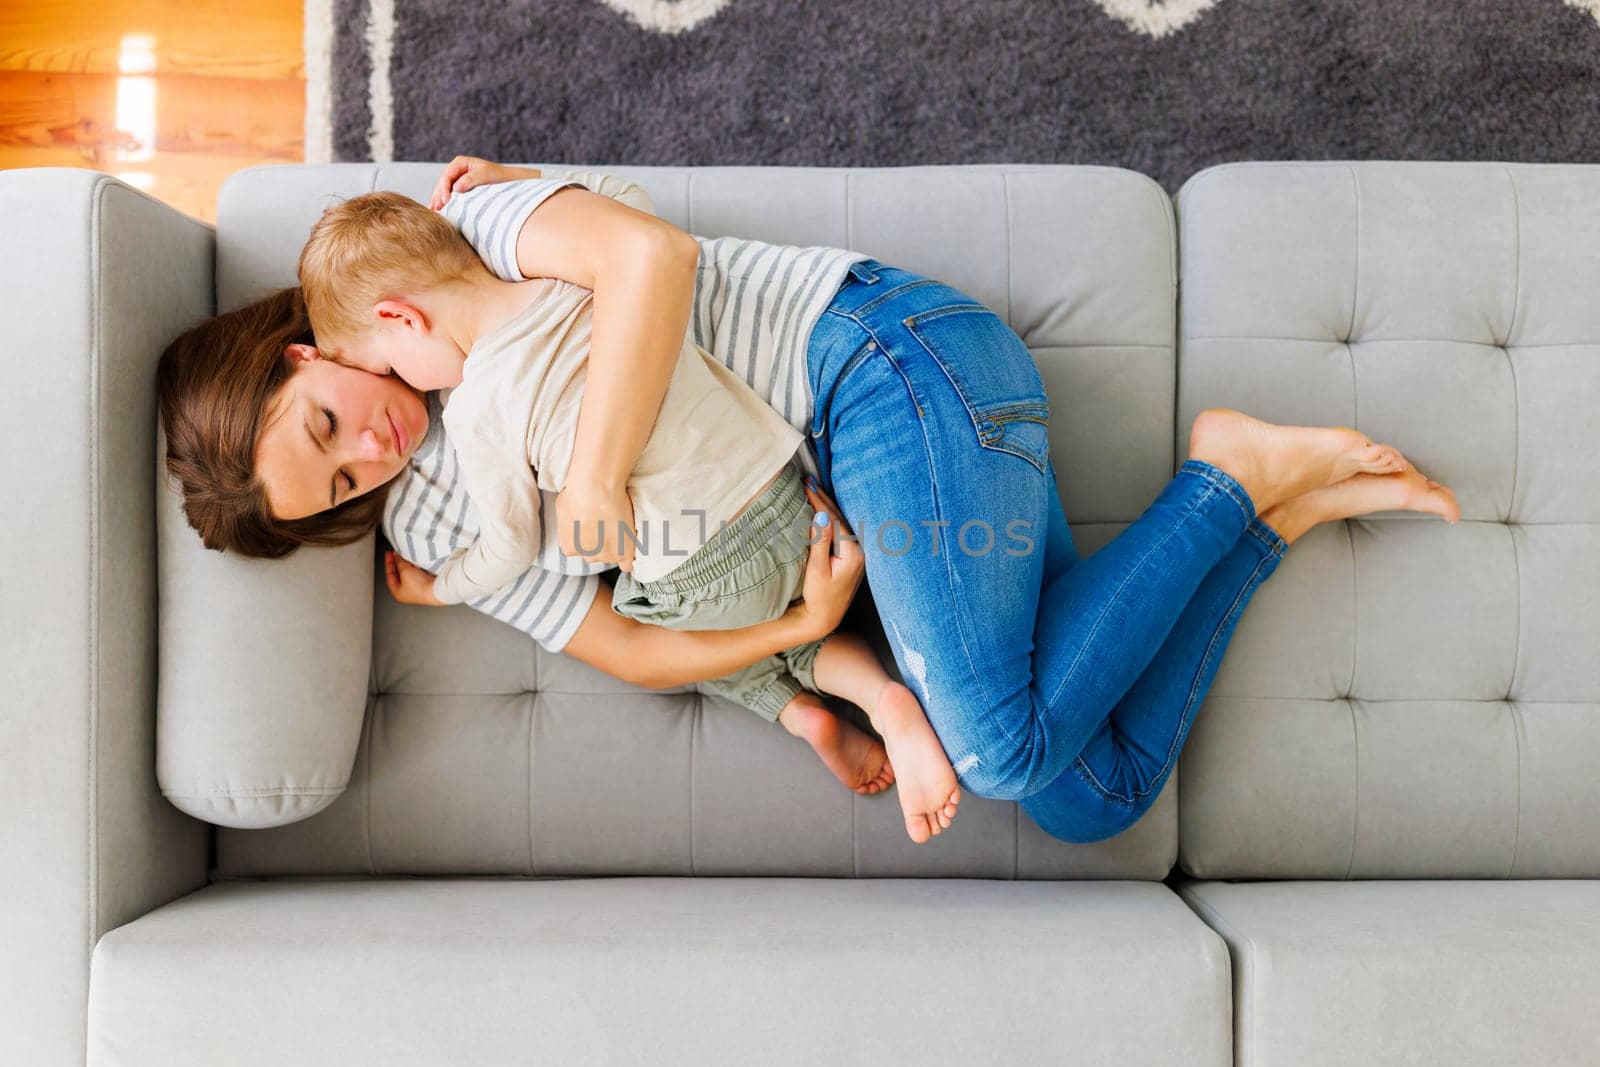 Mother embraces her cute little son while laying together on the couch in the living room